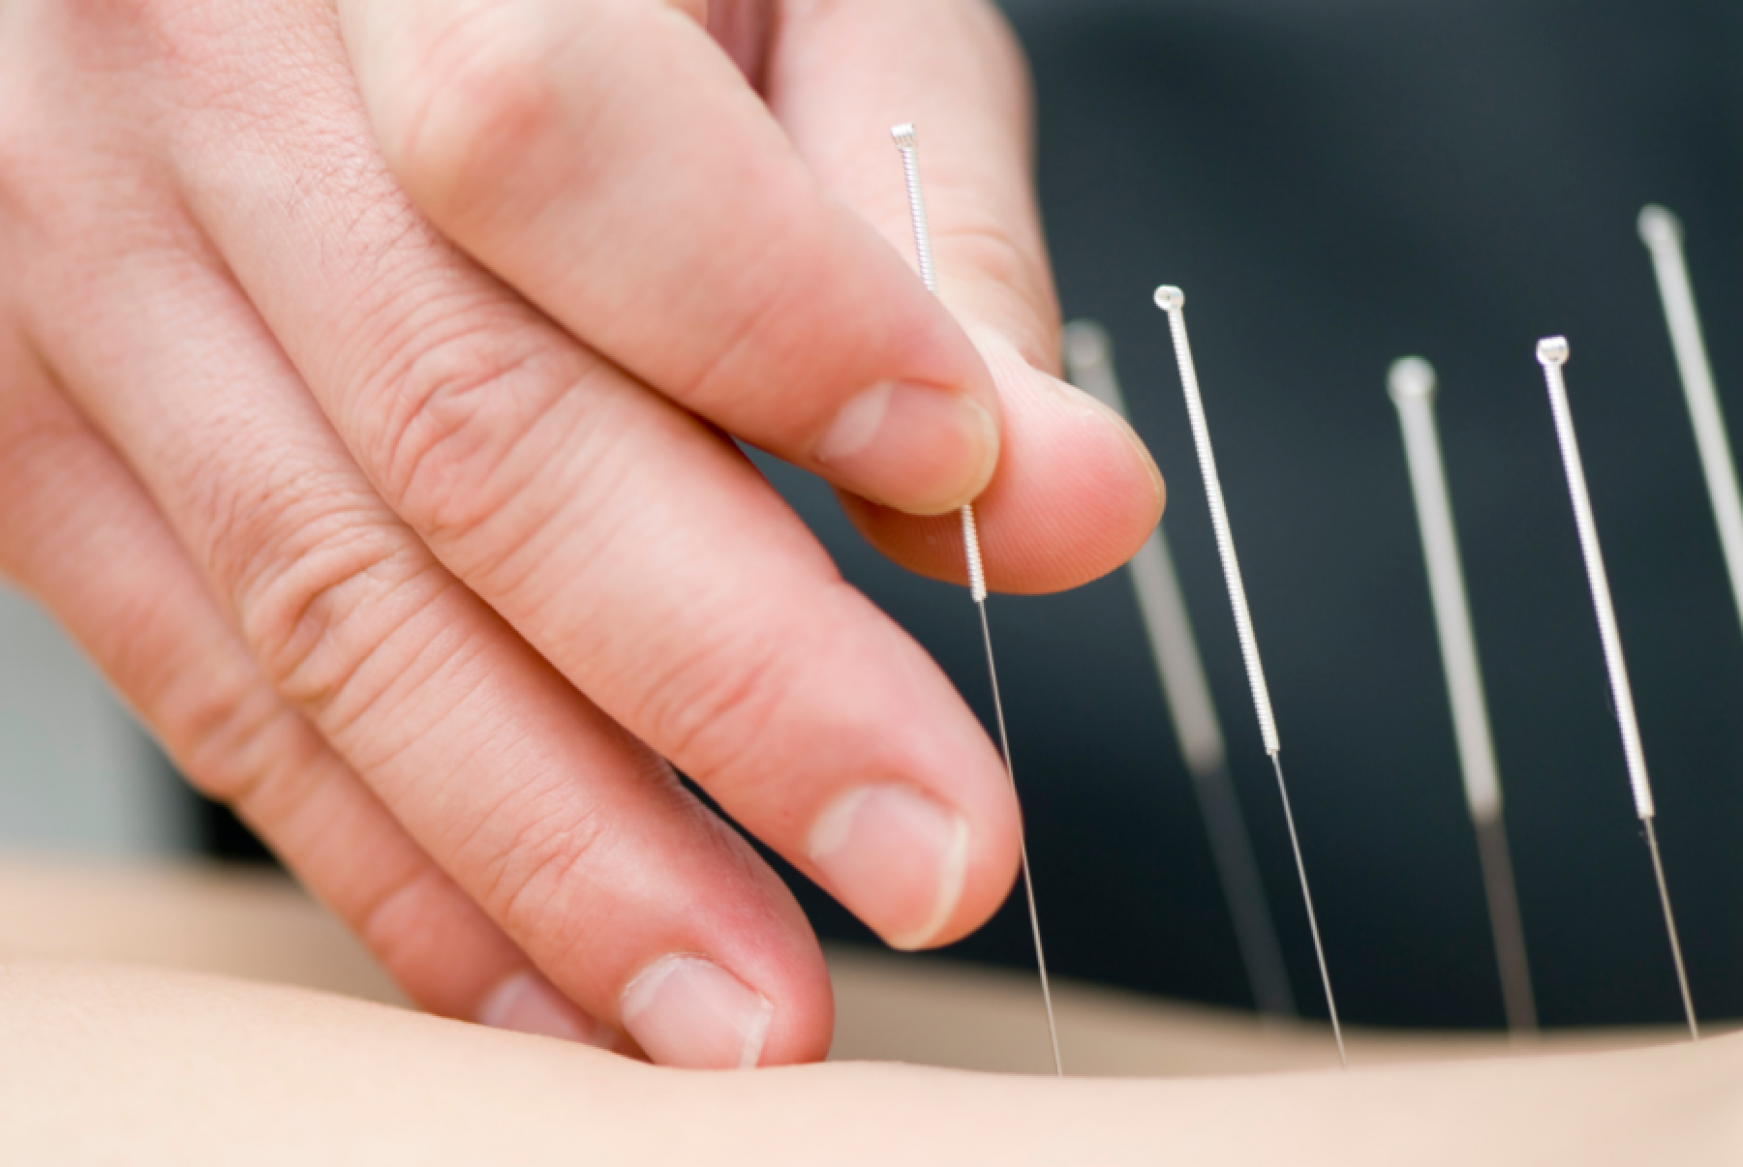 more research is needed to find out if acupuncture